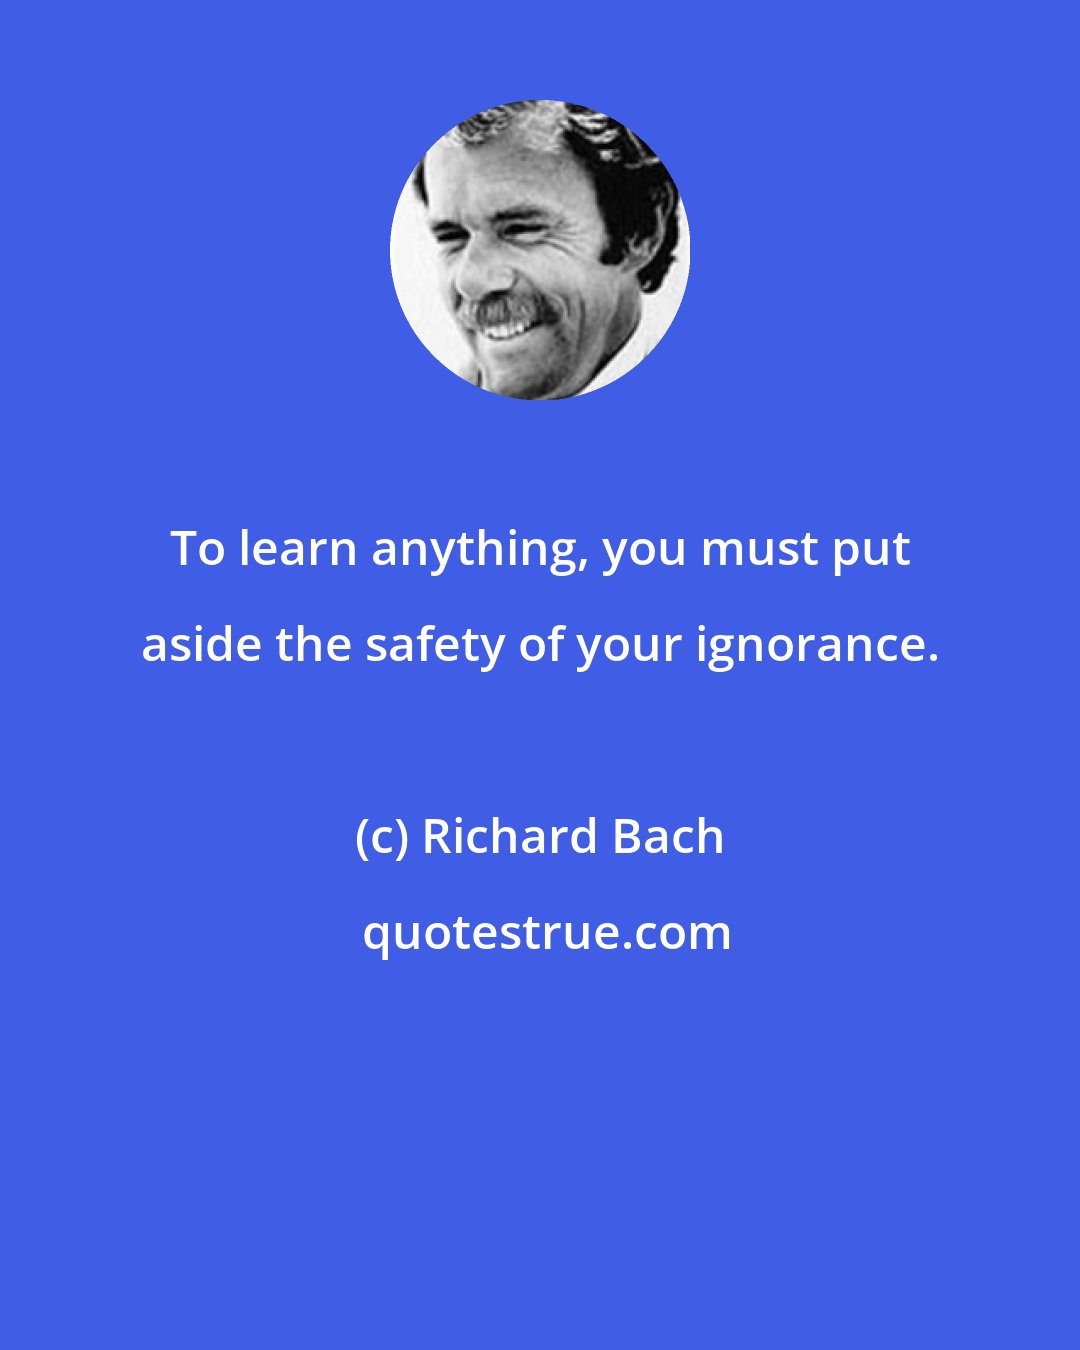 Richard Bach: To learn anything, you must put aside the safety of your ignorance.